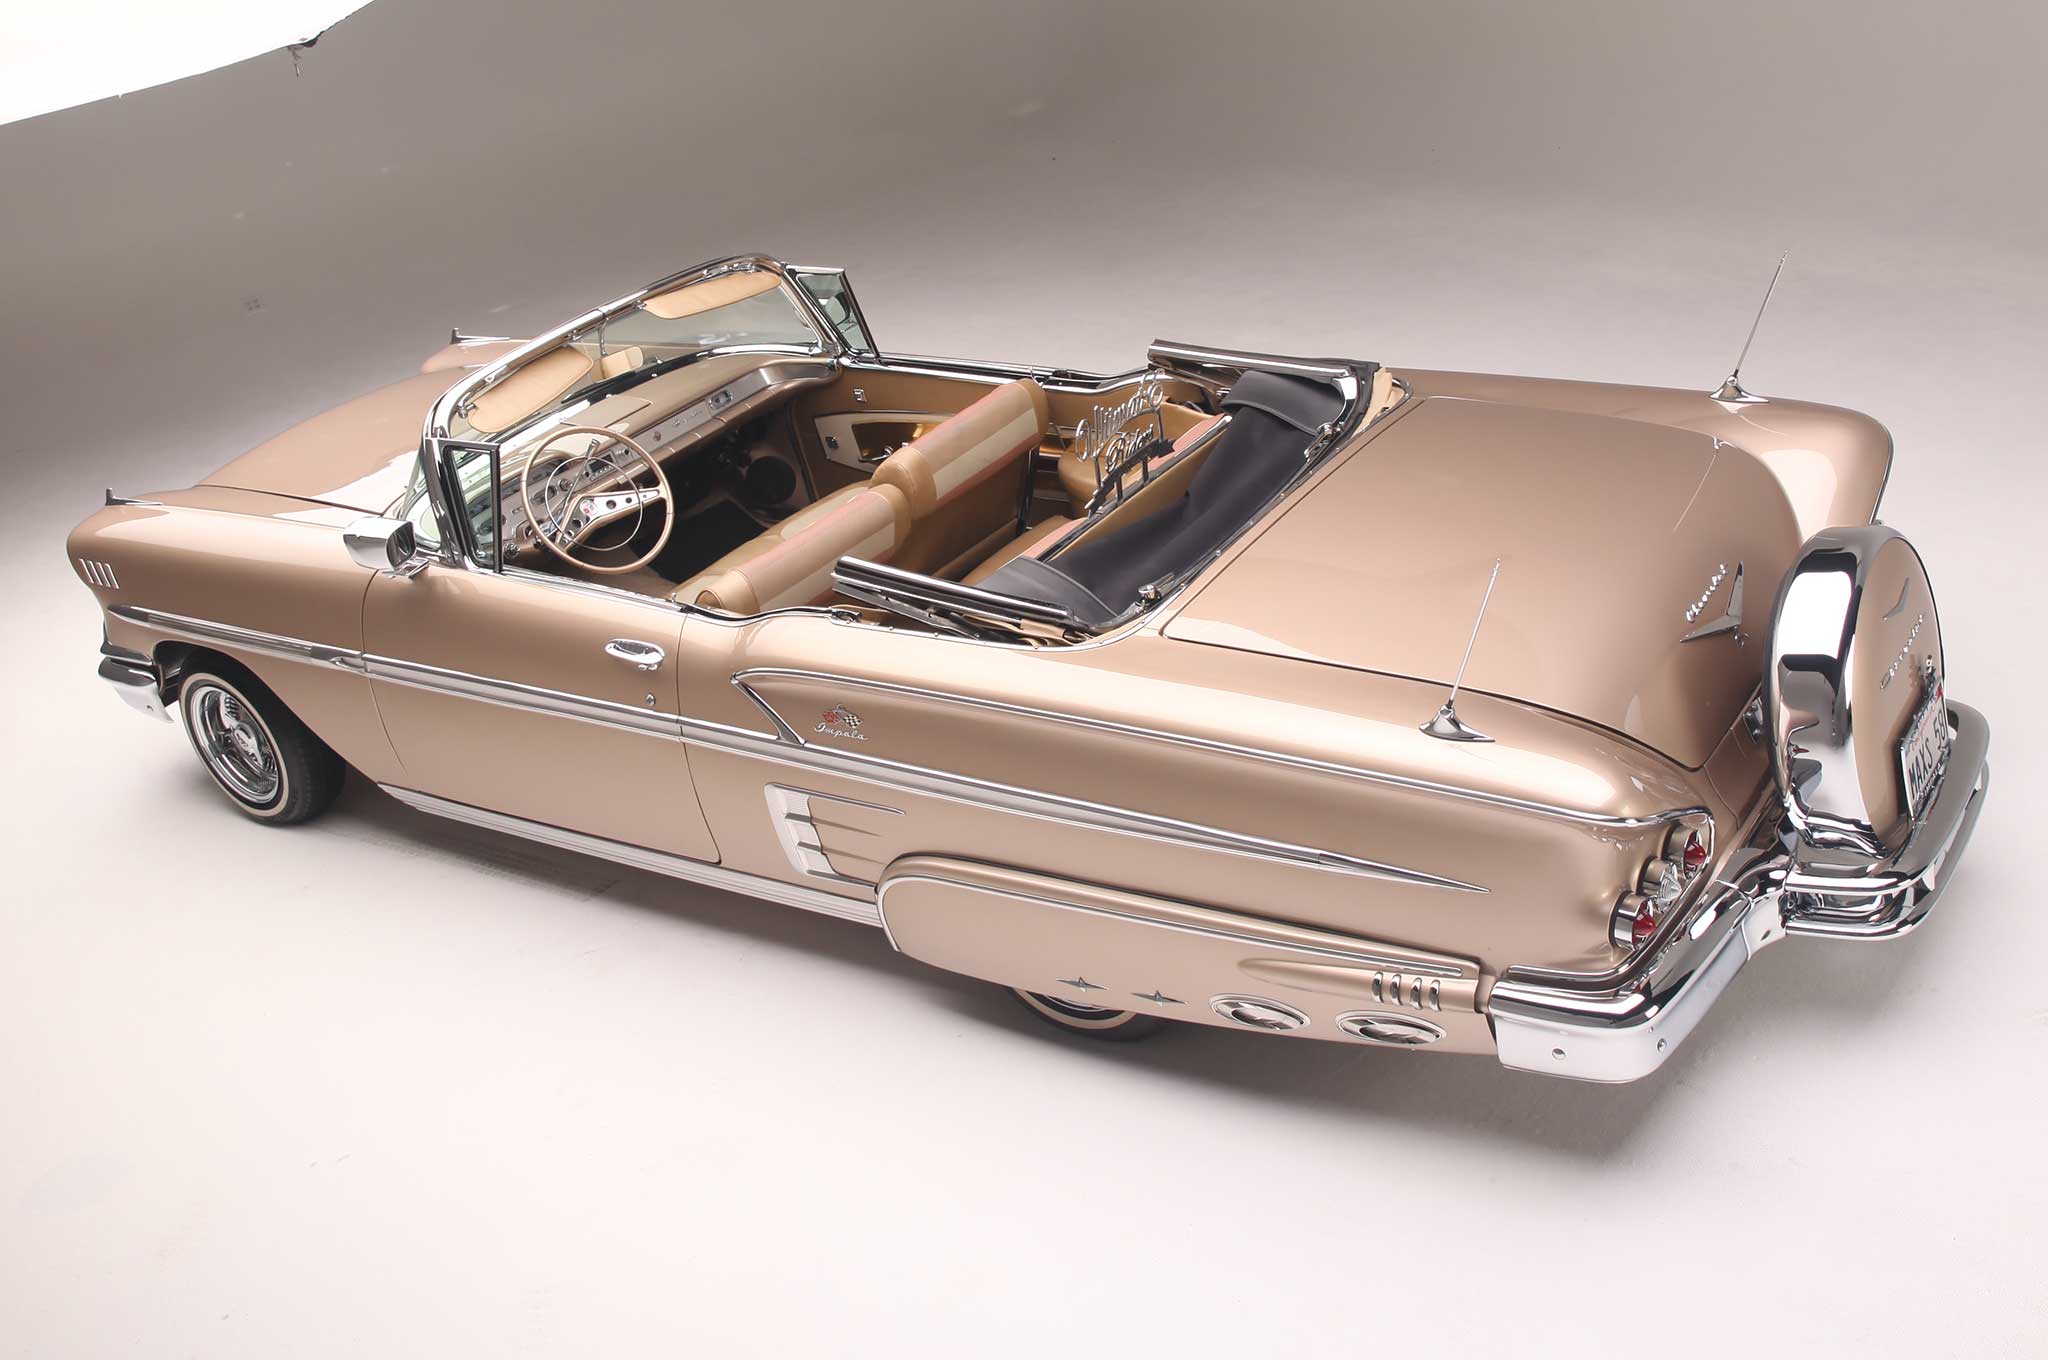 1958 Chevrolet Impala Convertible Lowrider Muscle Car 2048x1360